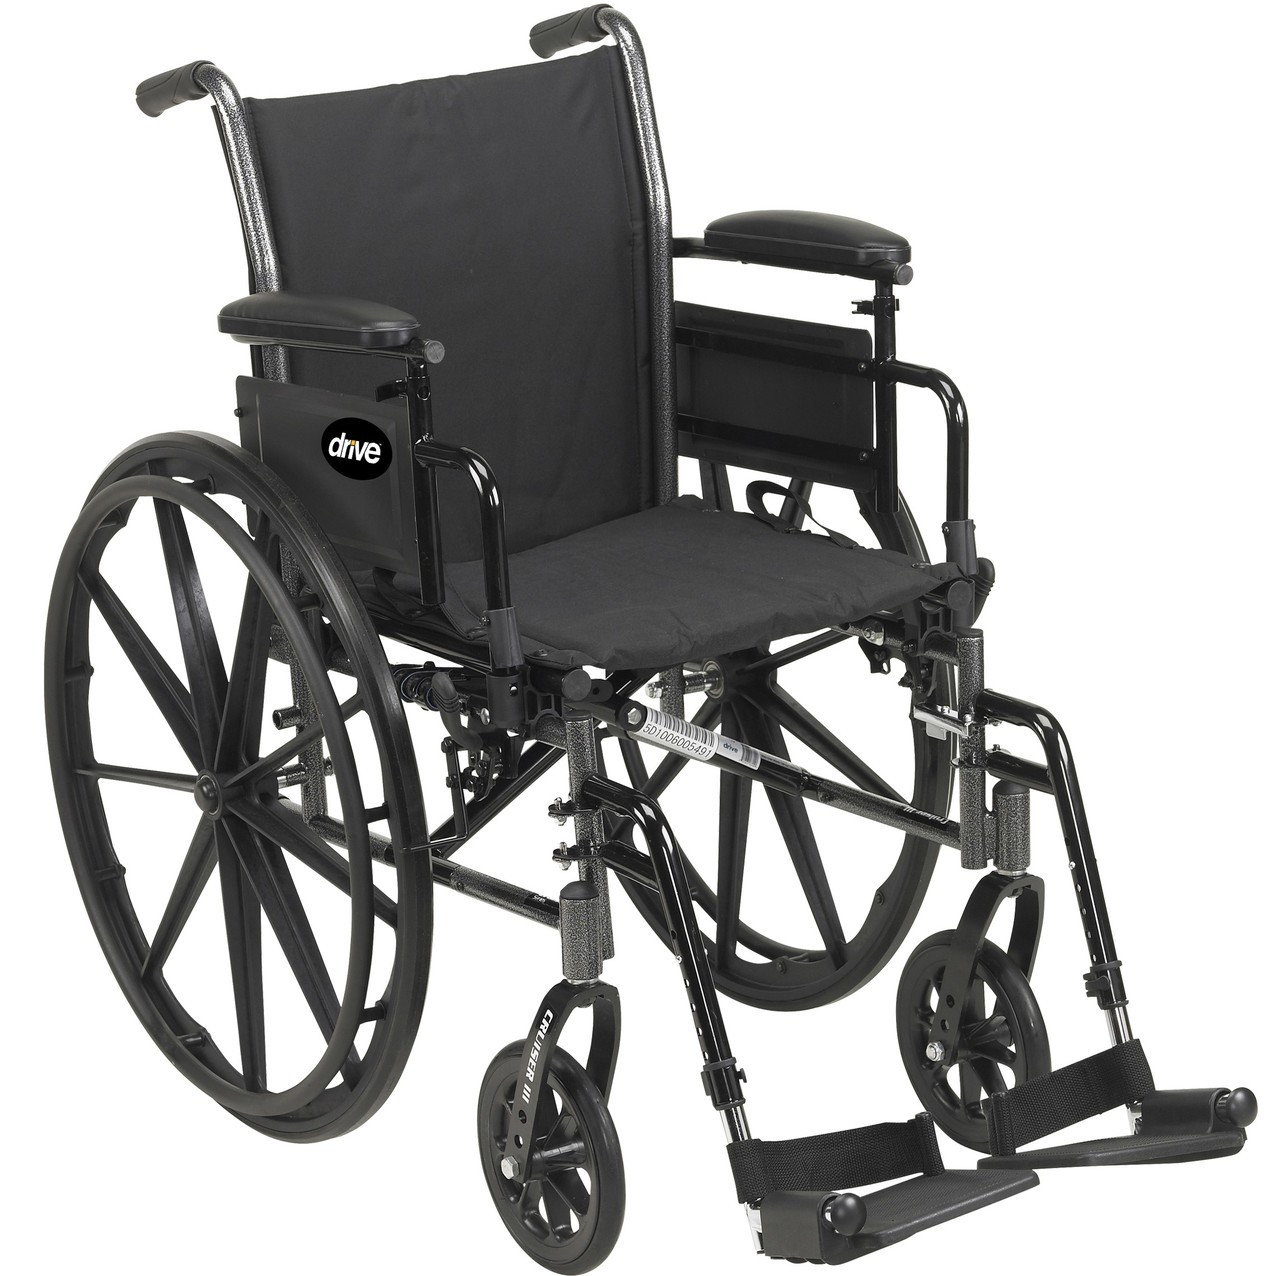 Drive K318DFA-SF Cruiser III Light Weight Wheelchair with Flip Back Removable Arms, Full Arms, Swing away Footrests, 18" Seat (K318DFA-SF)